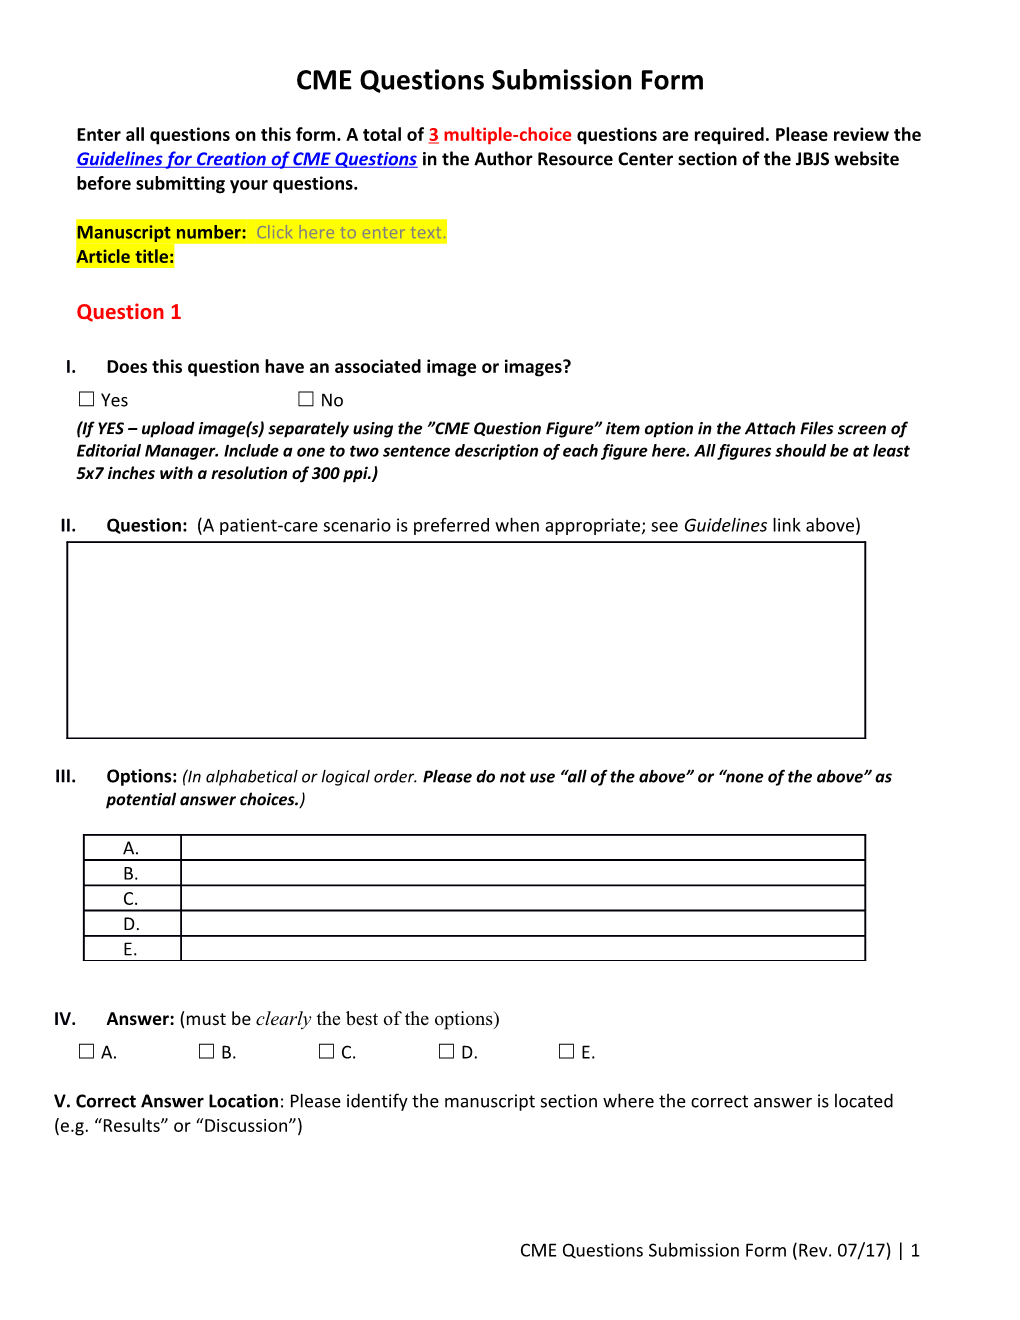 CME Questions Submission Form